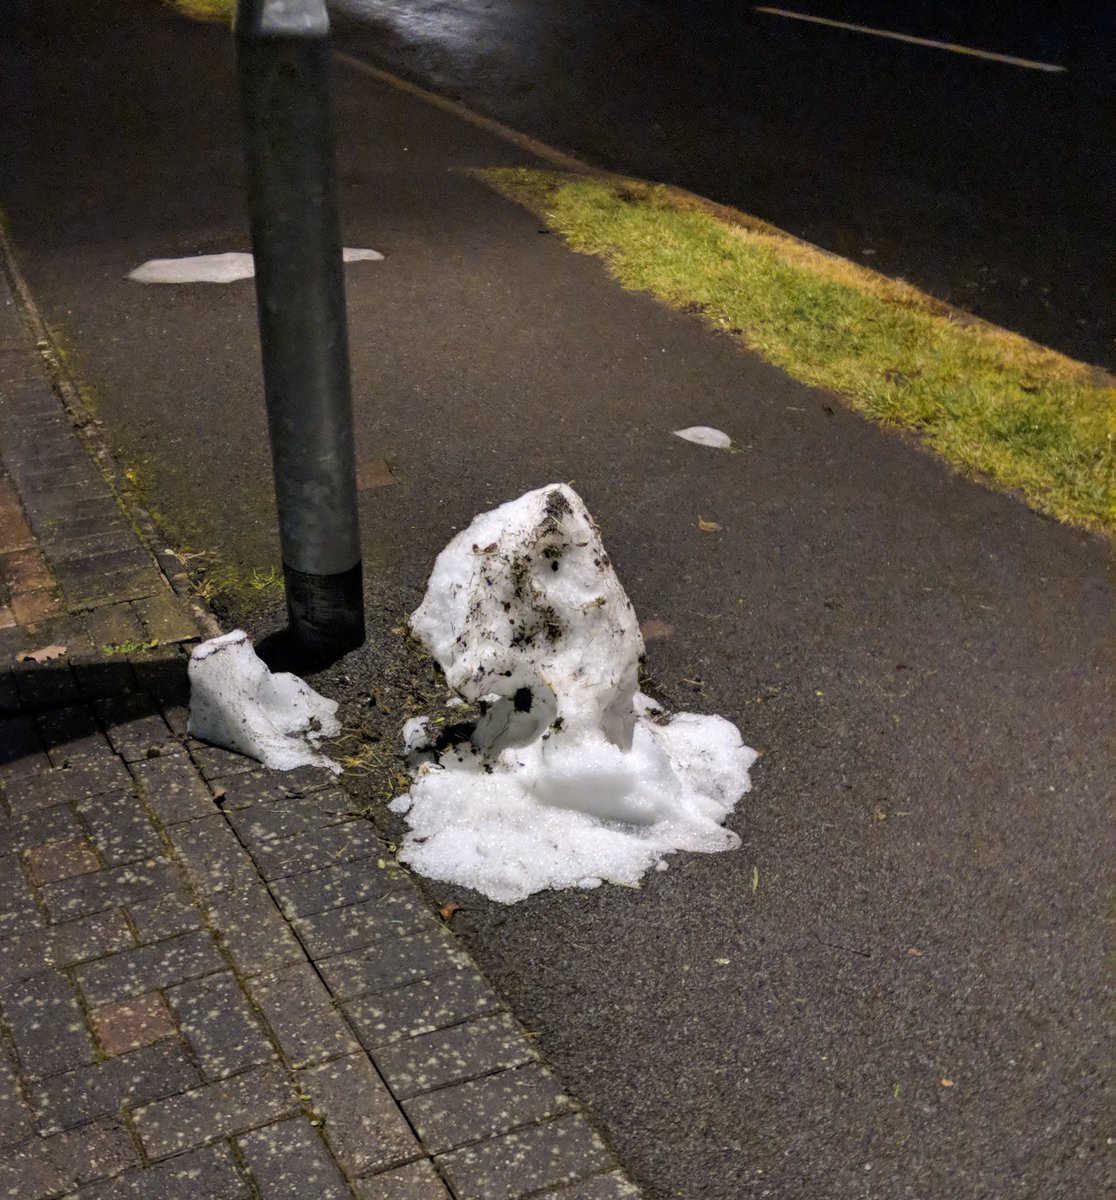 RIP snowman  - embedded image 